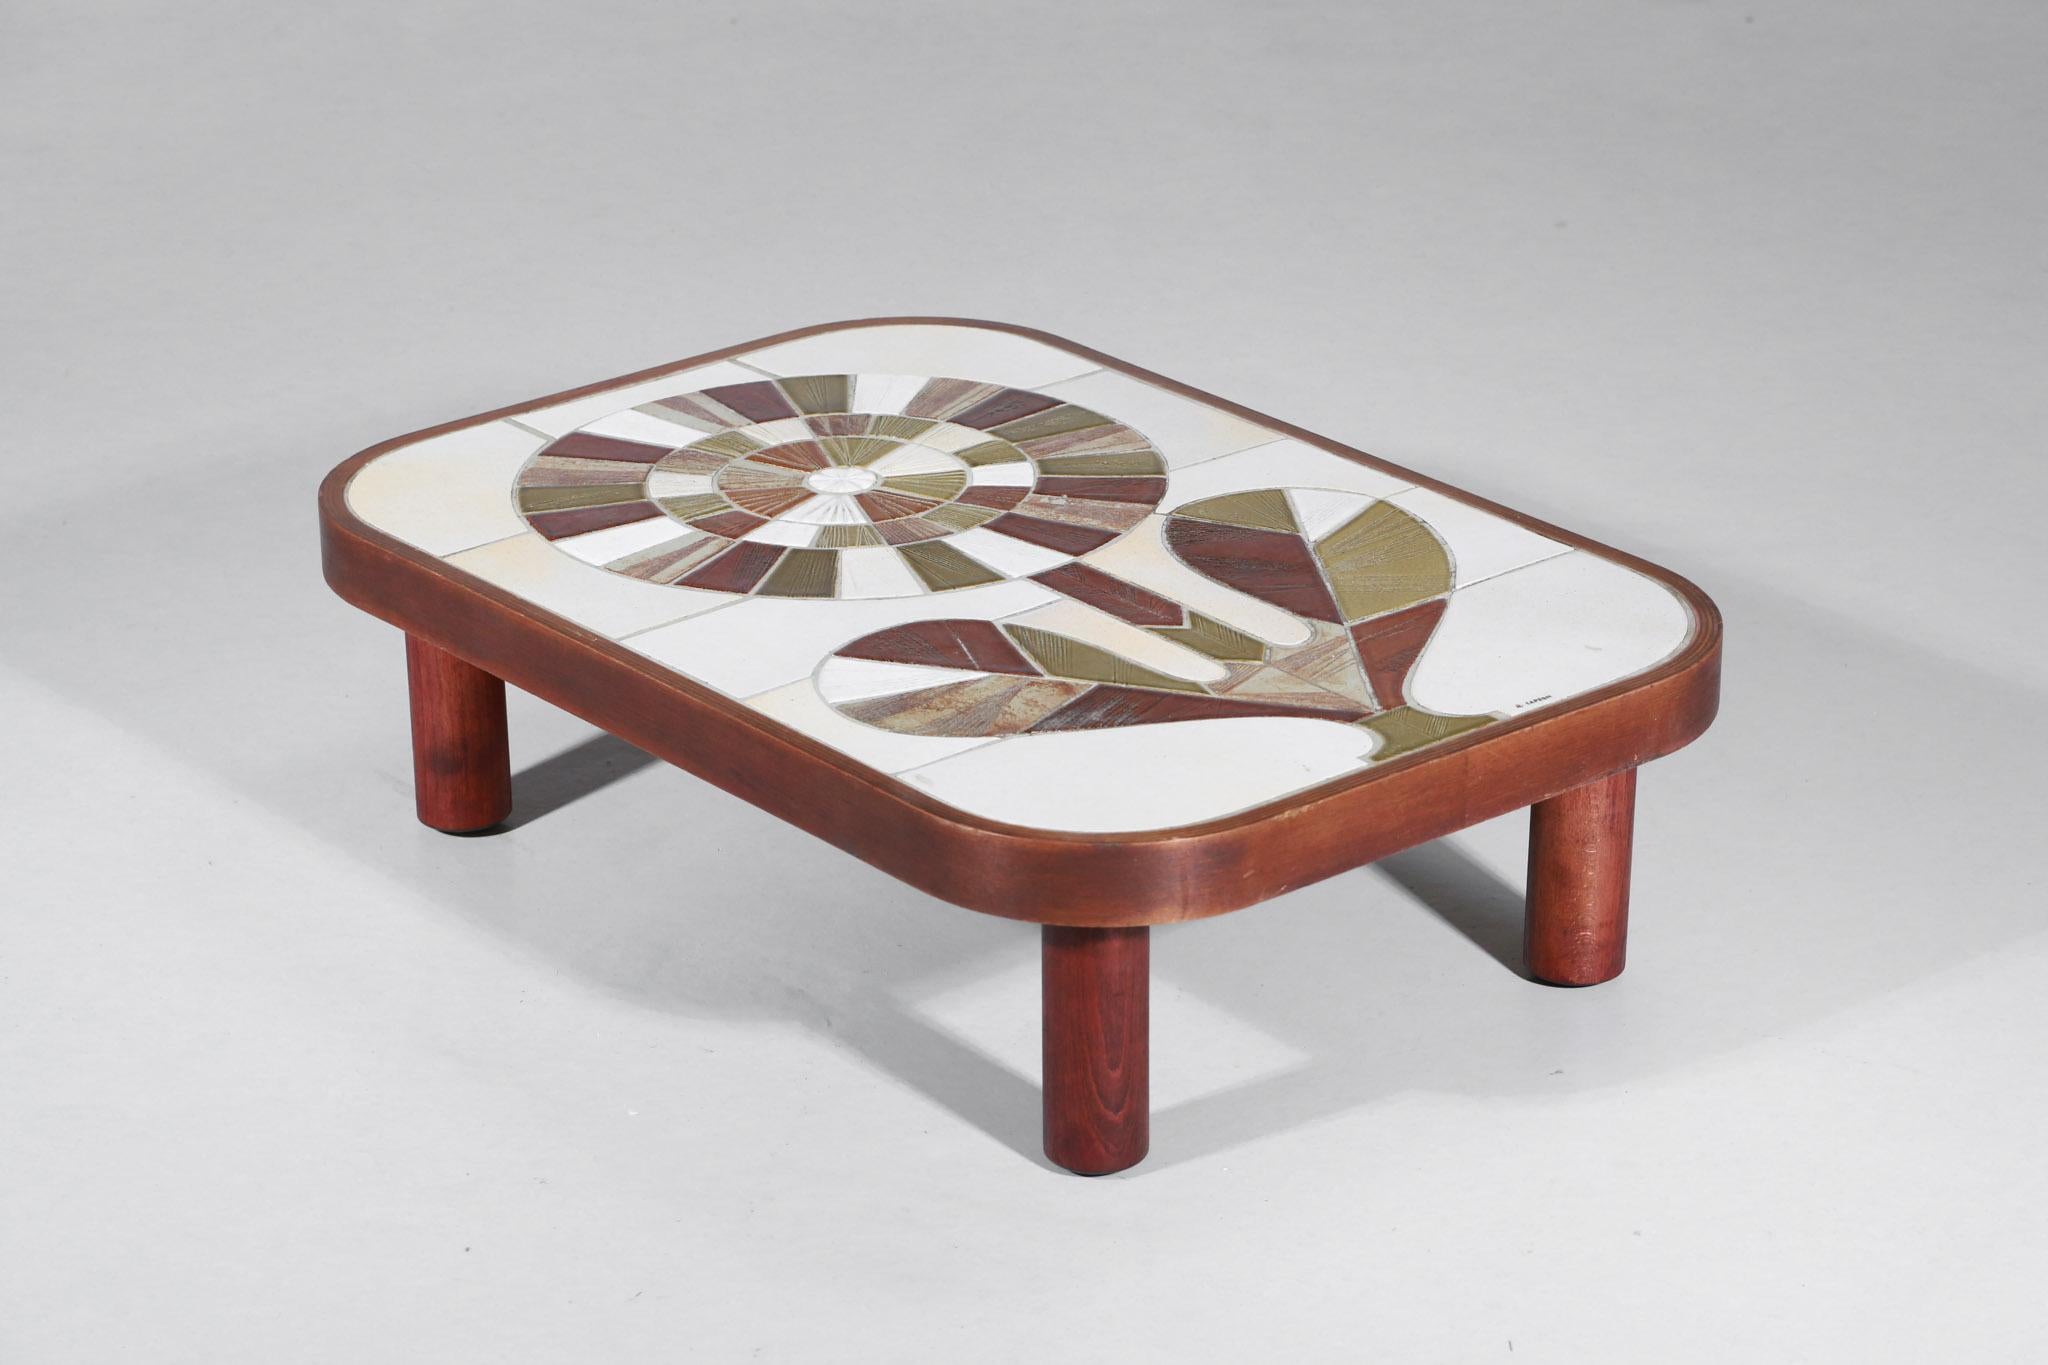 Hand-Crafted Coffee Table by French Ceramist Roger Capron in the Shape of a Flower